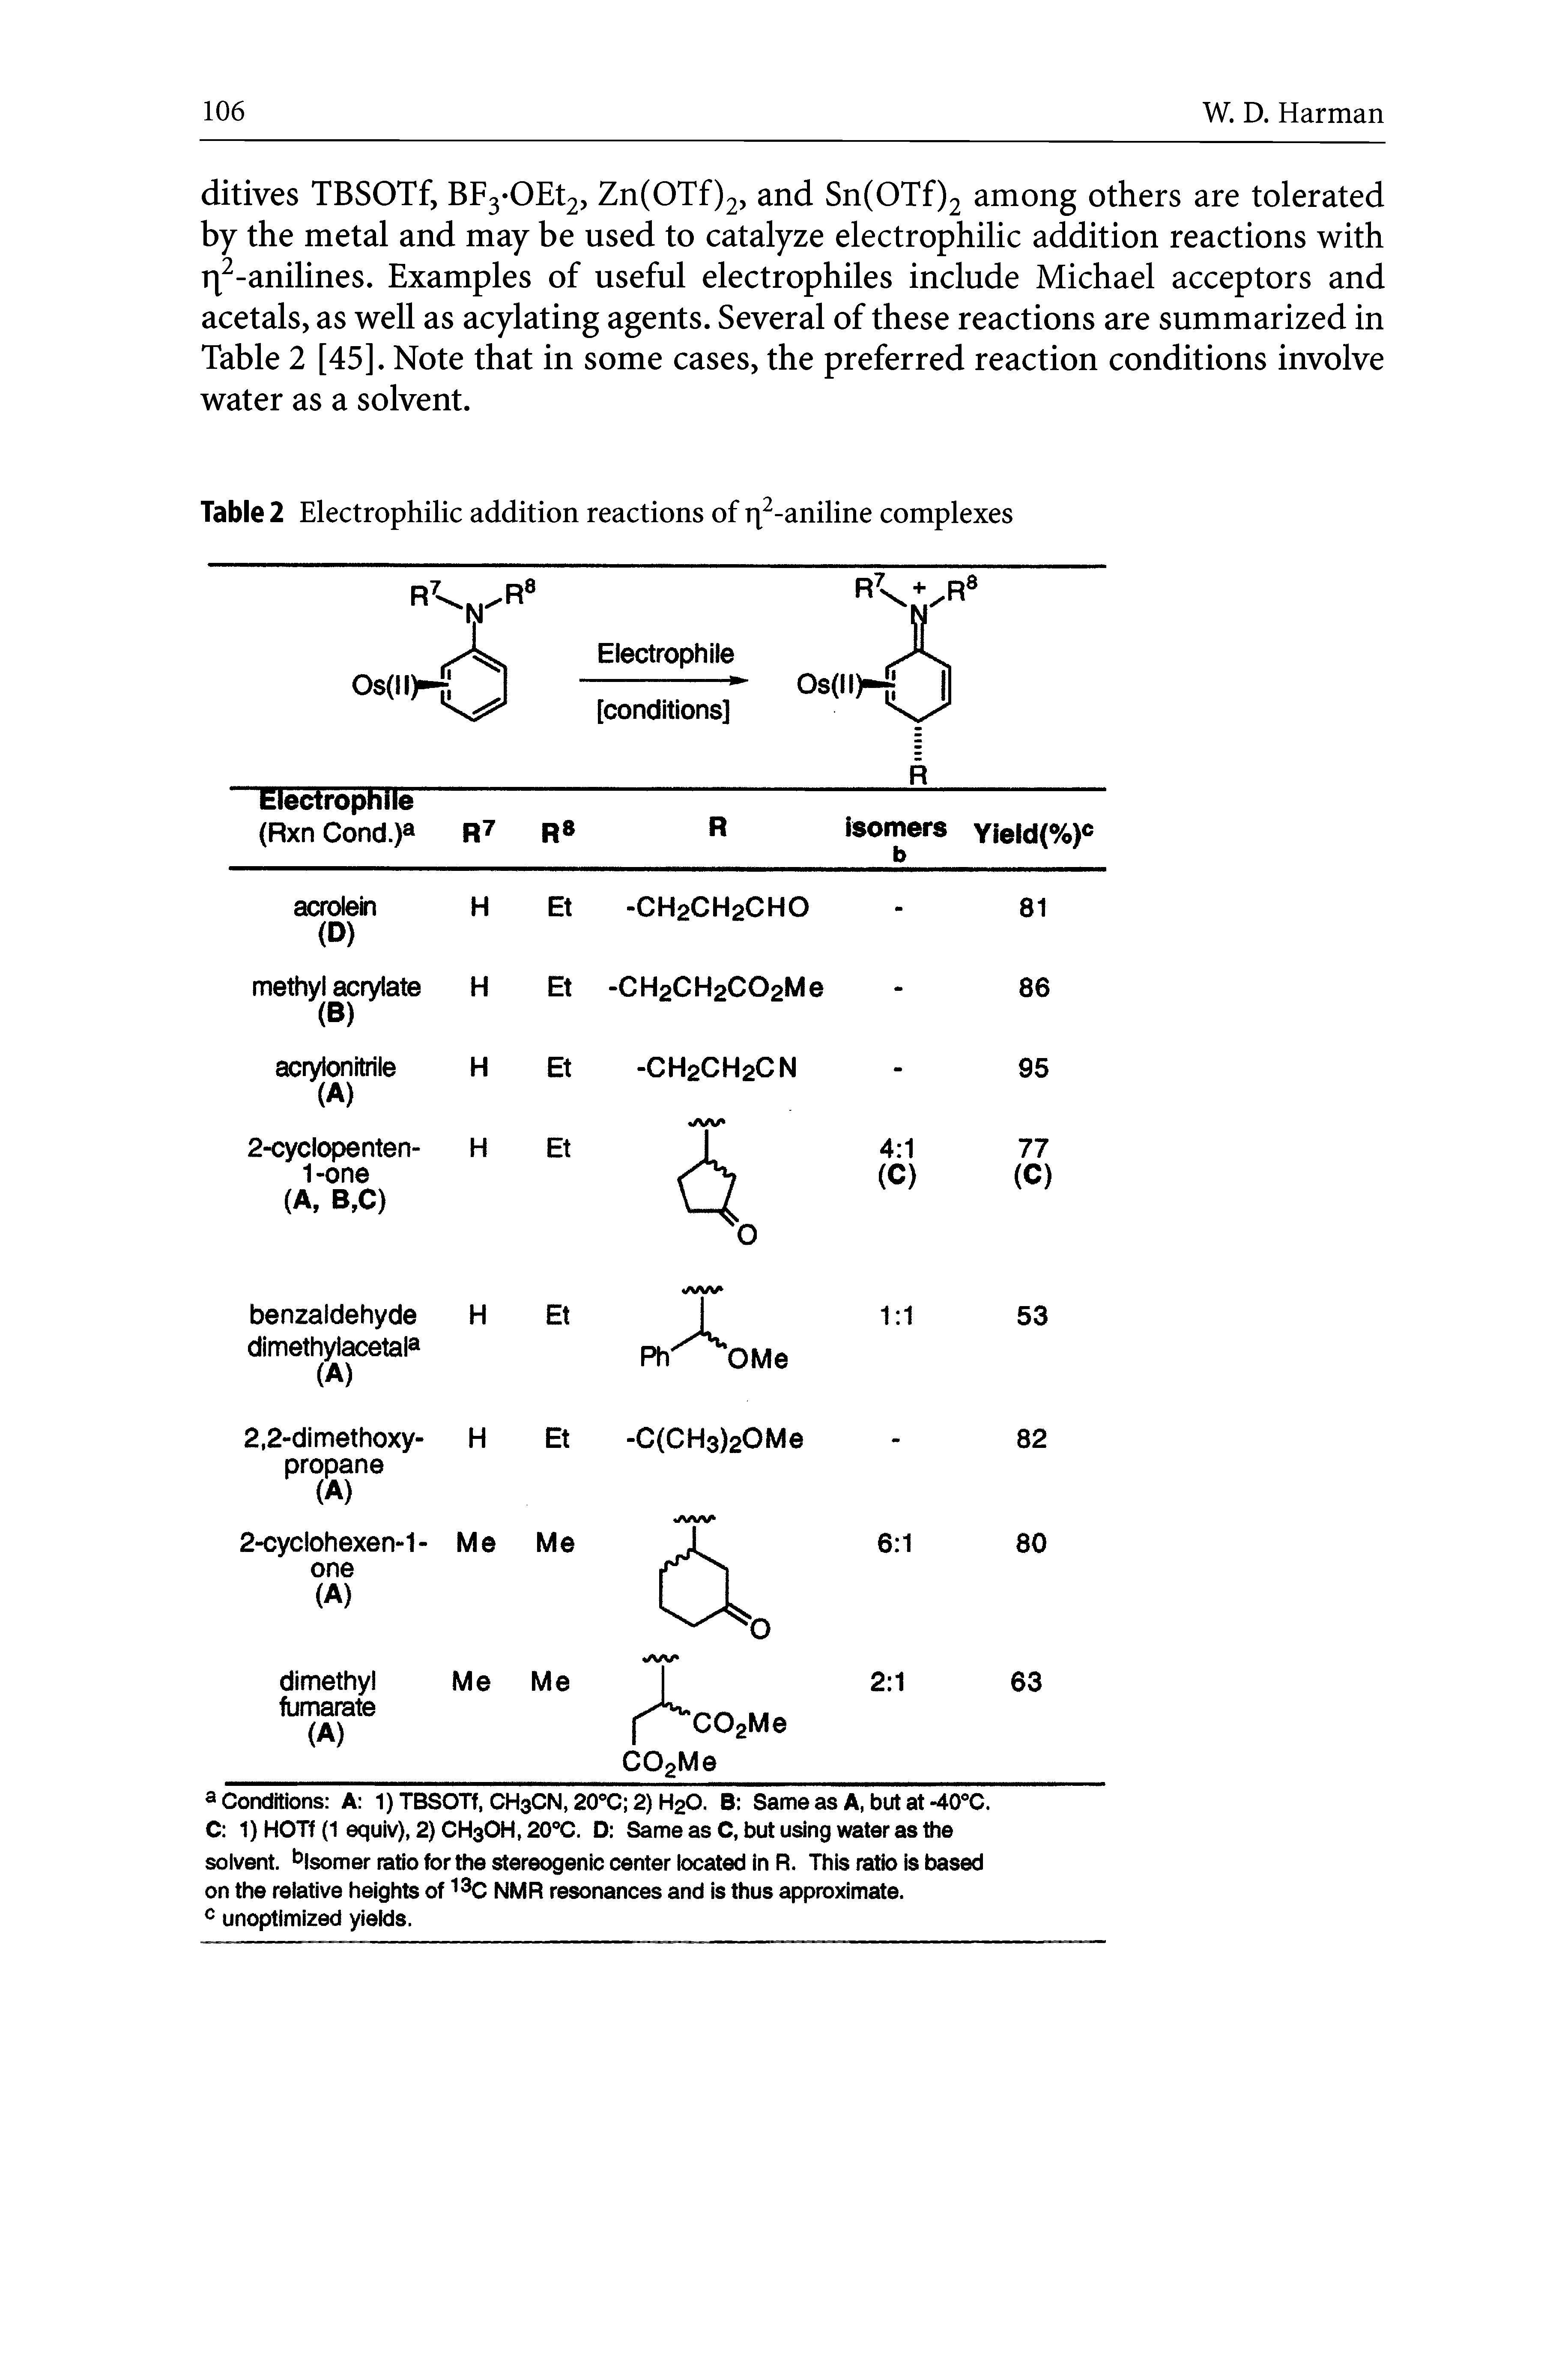 Table 2 Electrophilic addition reactions of r[ -aniline complexes...